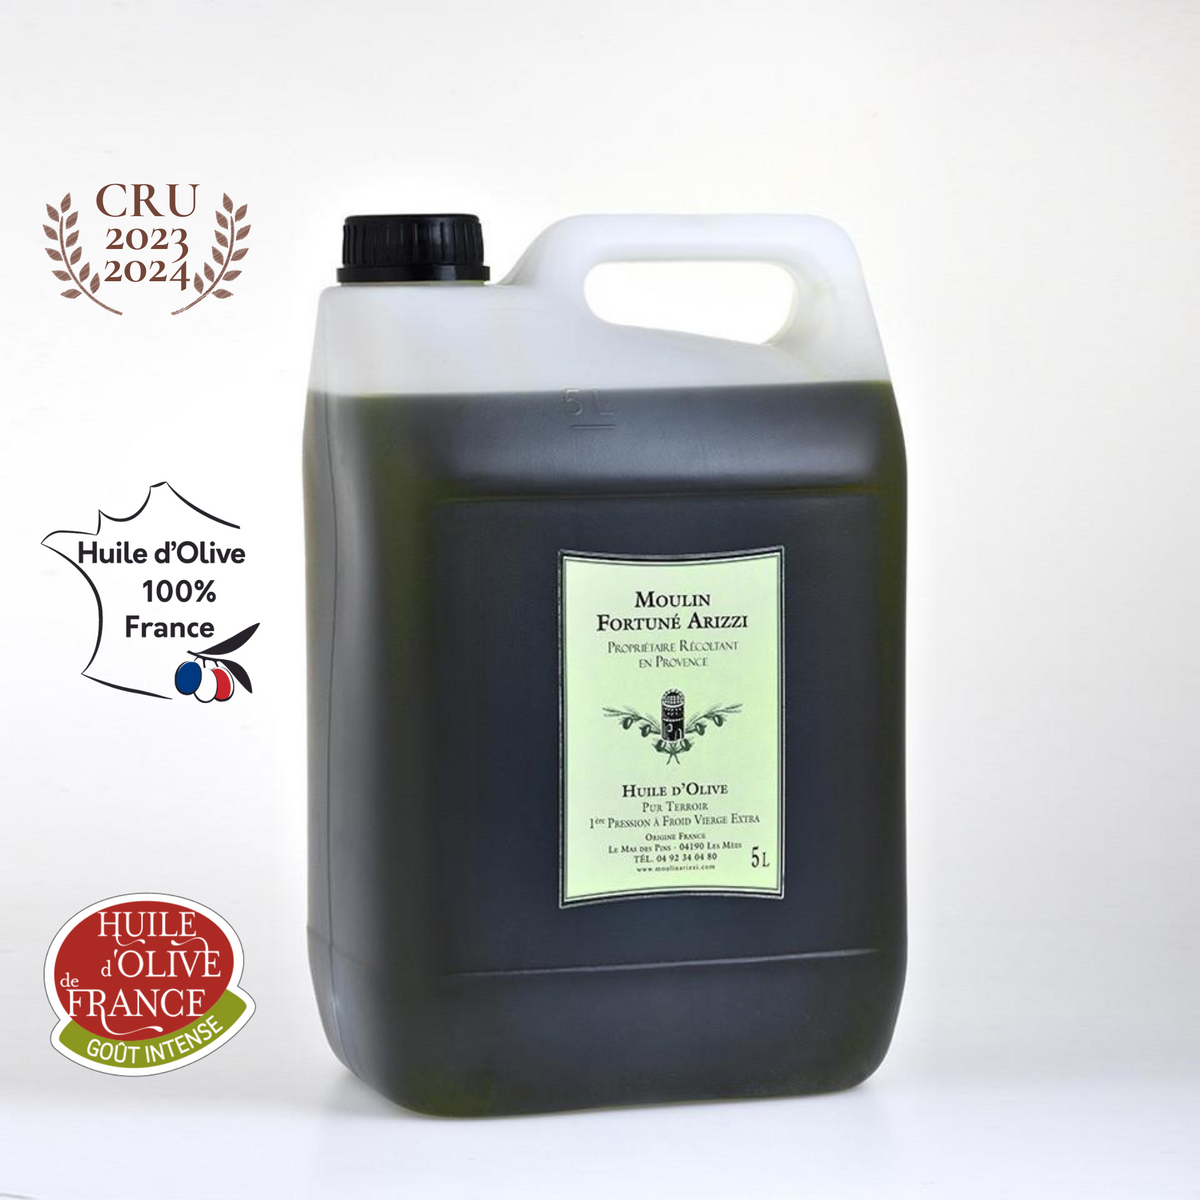 Huile d'Olive Vierge Extra 5 litres - Moulin F. Arizzi – Moulin Fortuné  Arizzi